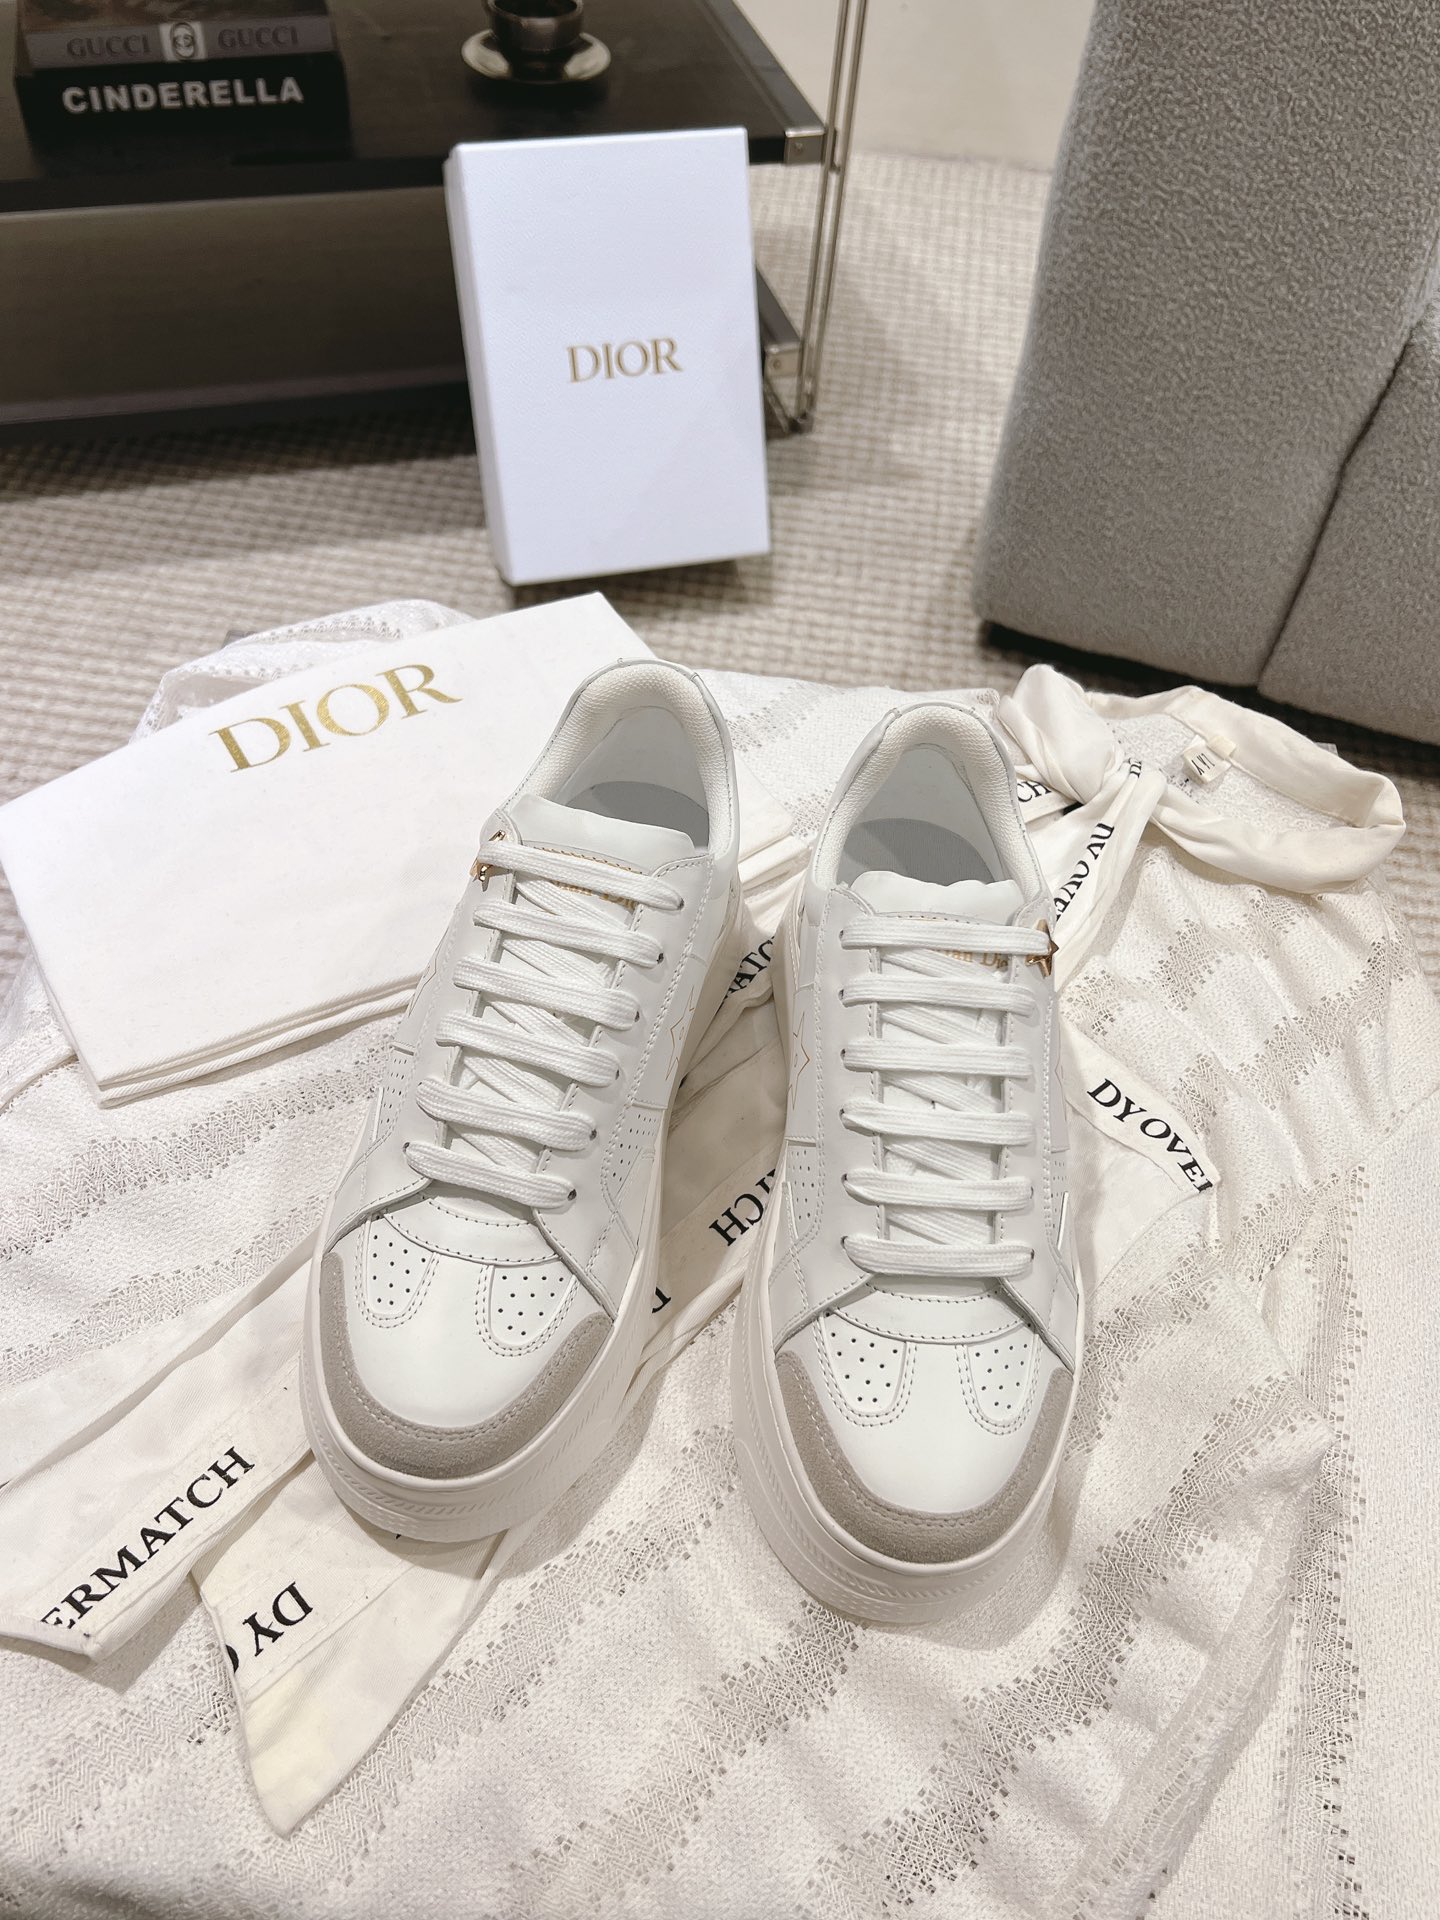 Dior Skateboard Shoes Sneakers Casual Shoes Platform Shoes White Splicing Cowhide Casual